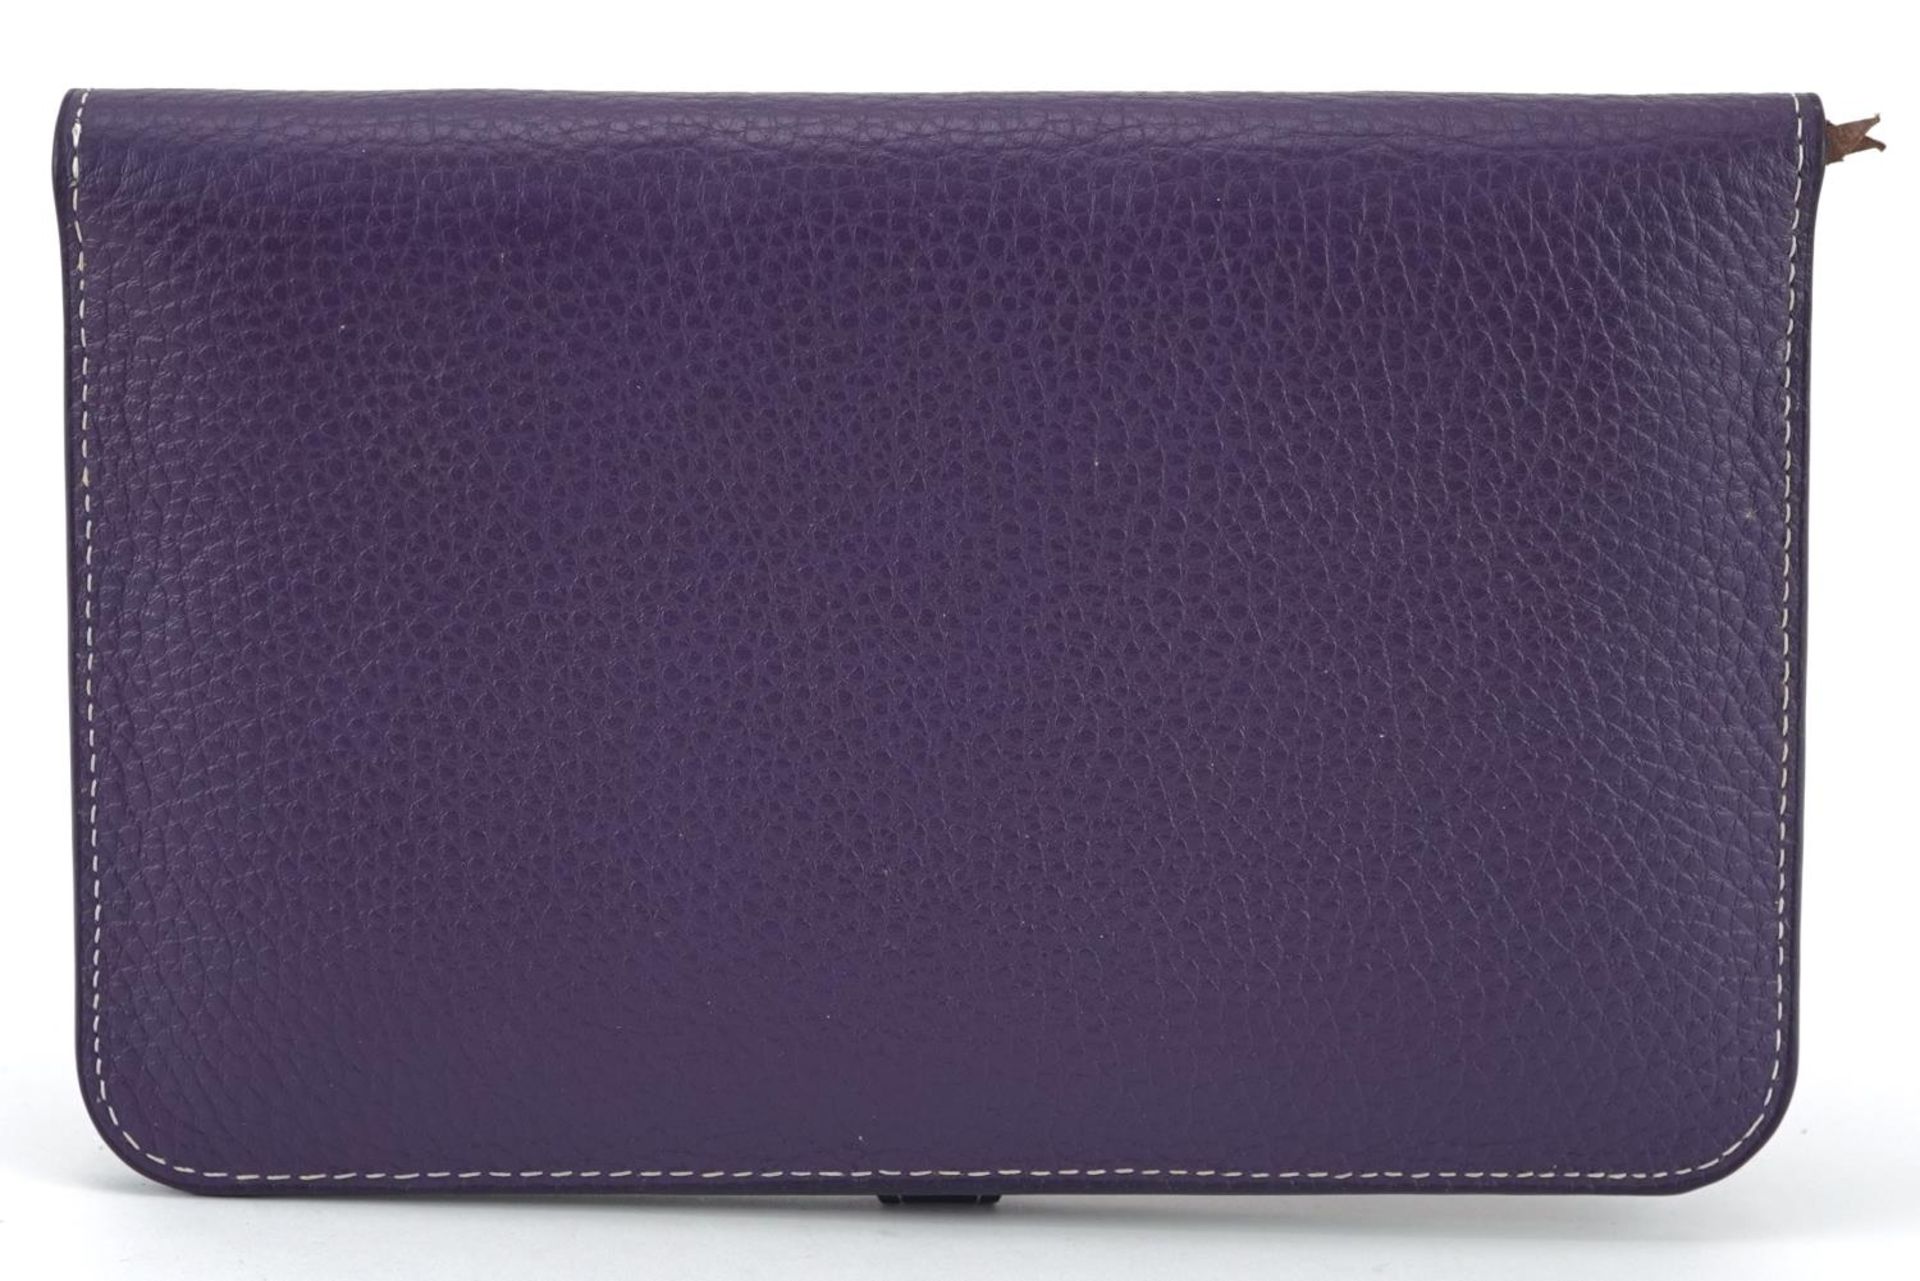 Hermes, French purple leather clutch purse with cardholder, dust bag and box, the clutch bag 19. - Image 6 of 6